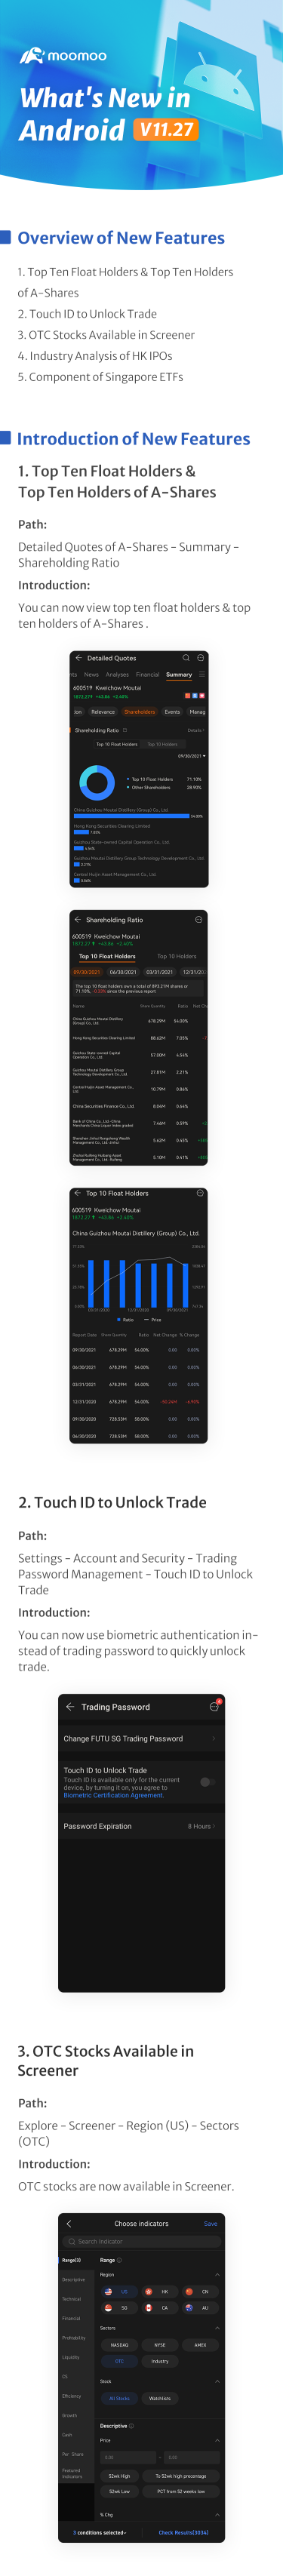 What's New: OTC Stock Screener And Top Holders of A-Shares Viewable in Android v11.27